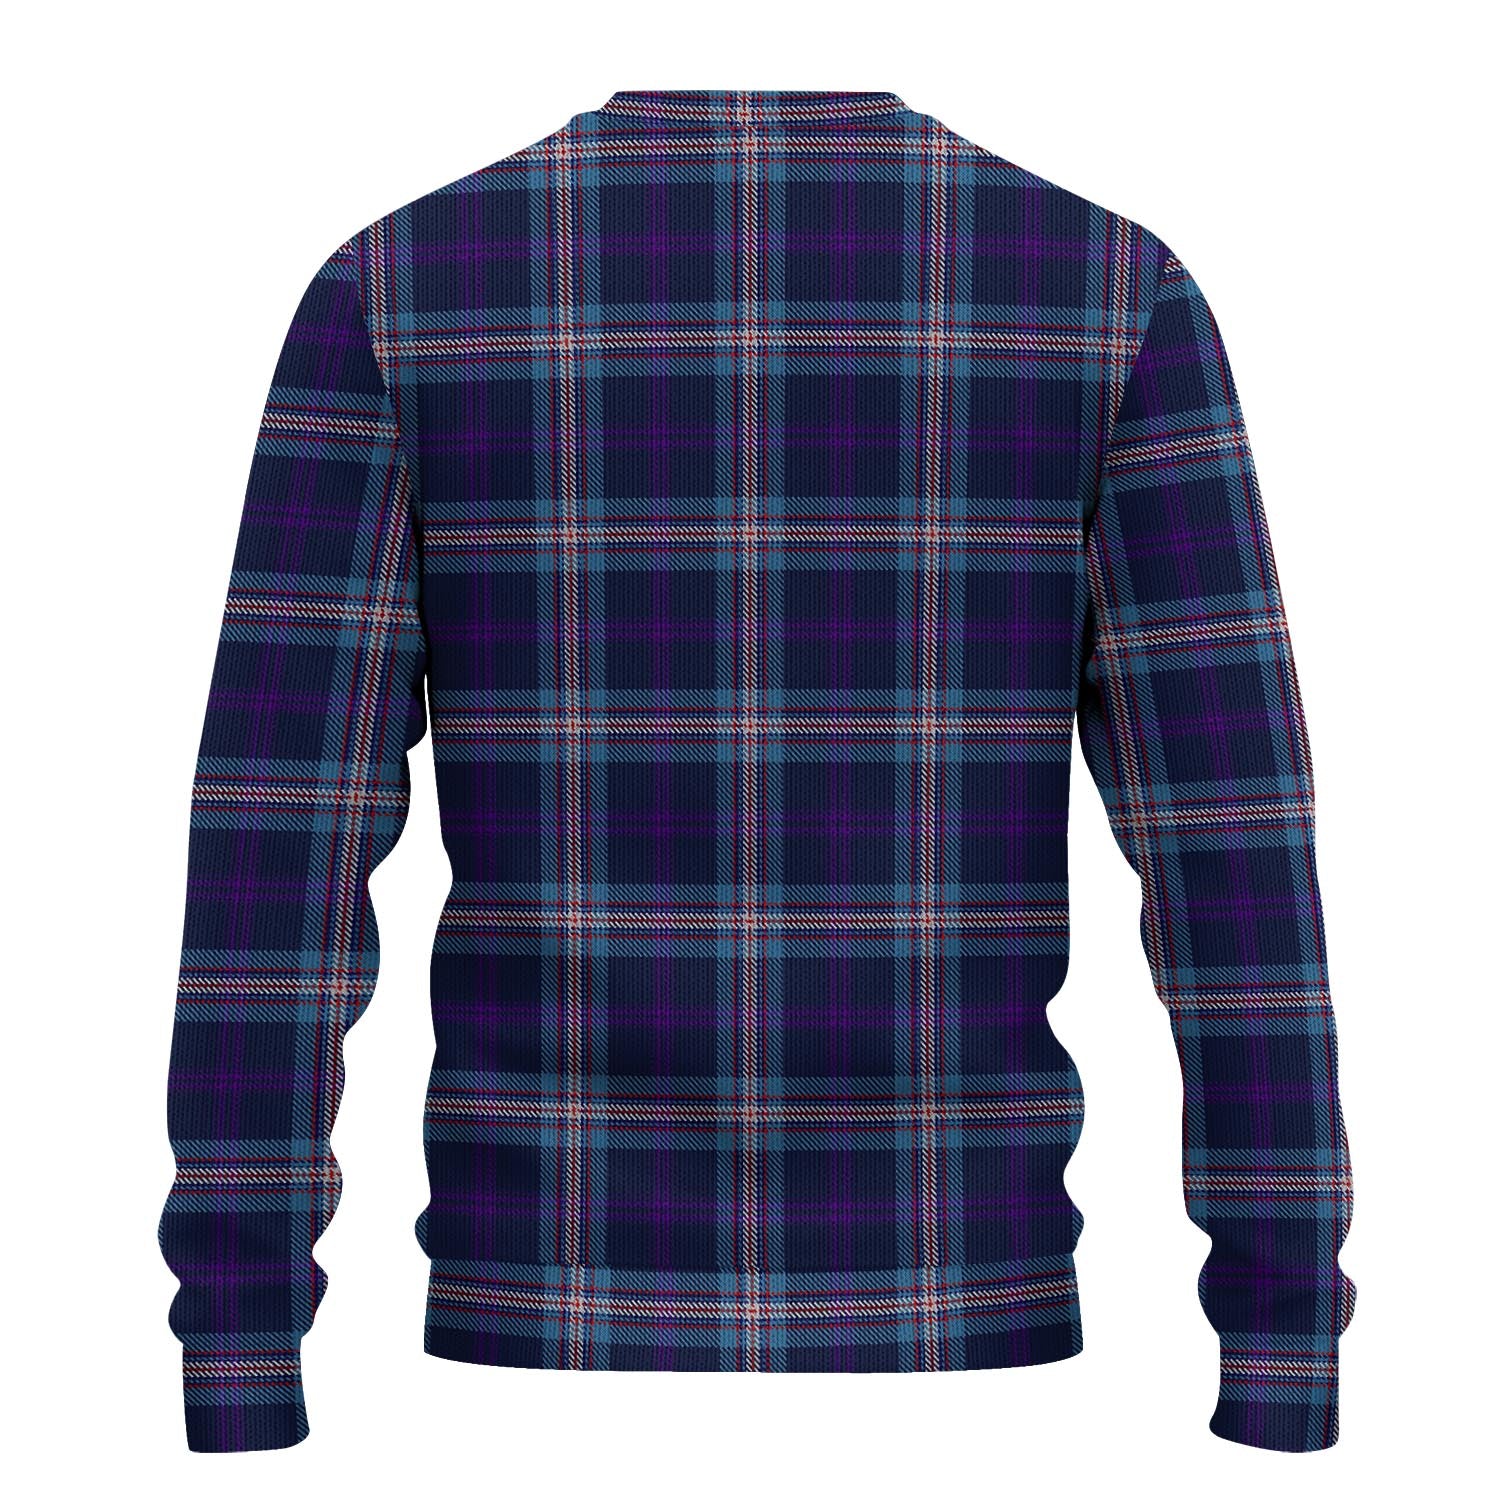 Nevoy Tartan Knitted Sweater with Family Crest - Tartanvibesclothing